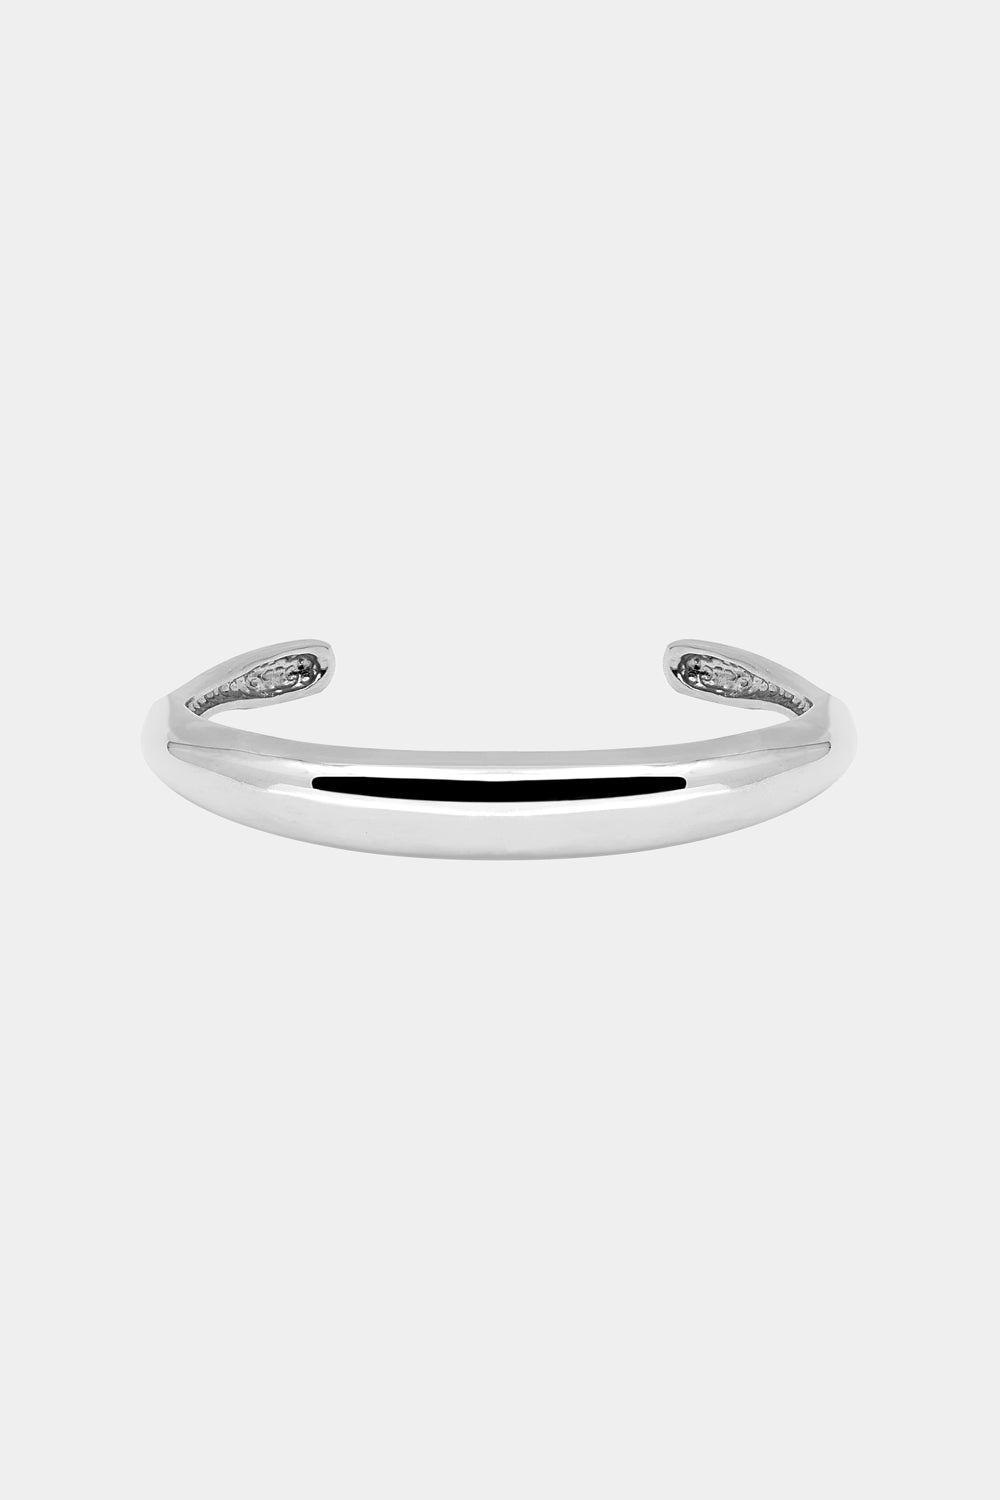 Blob Cuff | Silver or White Gold, More options available| Natasha Schweitzer